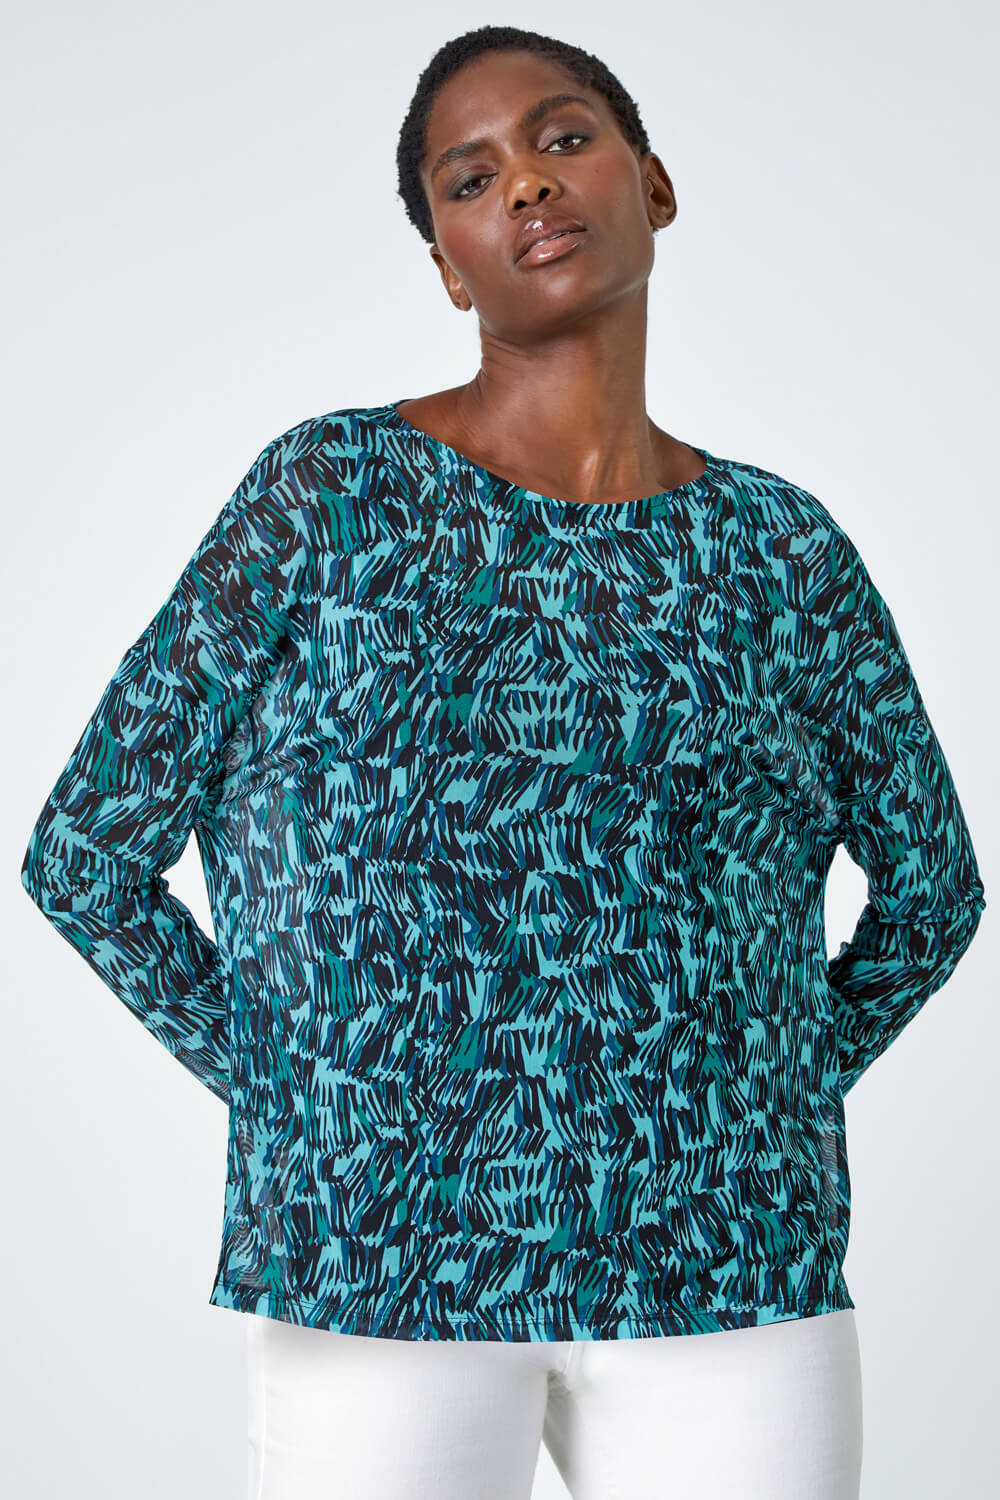 Blue Abstract Print Mesh Overlay Stretch Top, Image 5 of 5